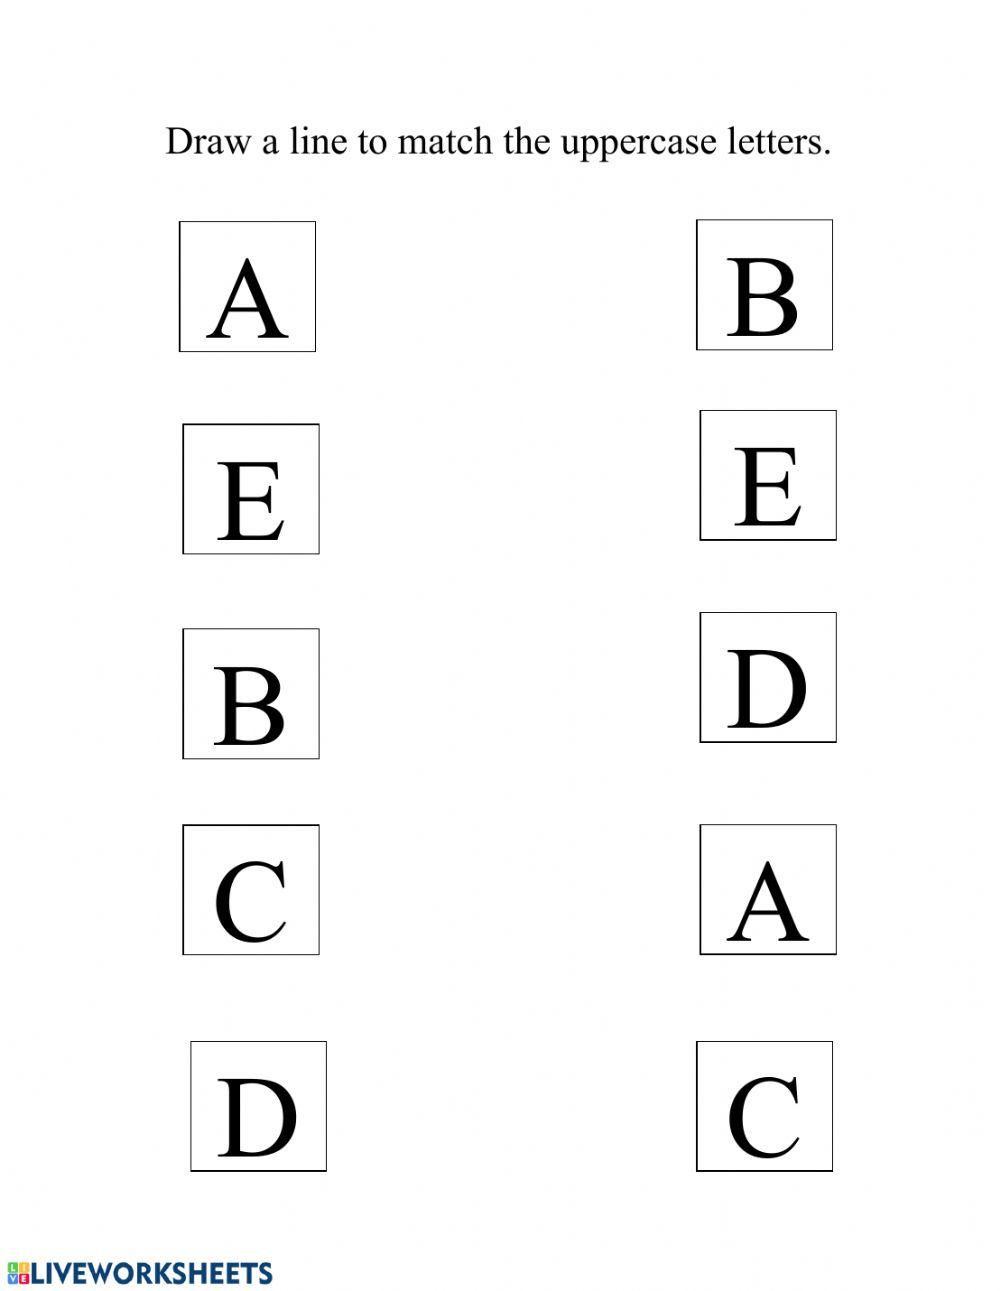 Match the uppercase letters A-E